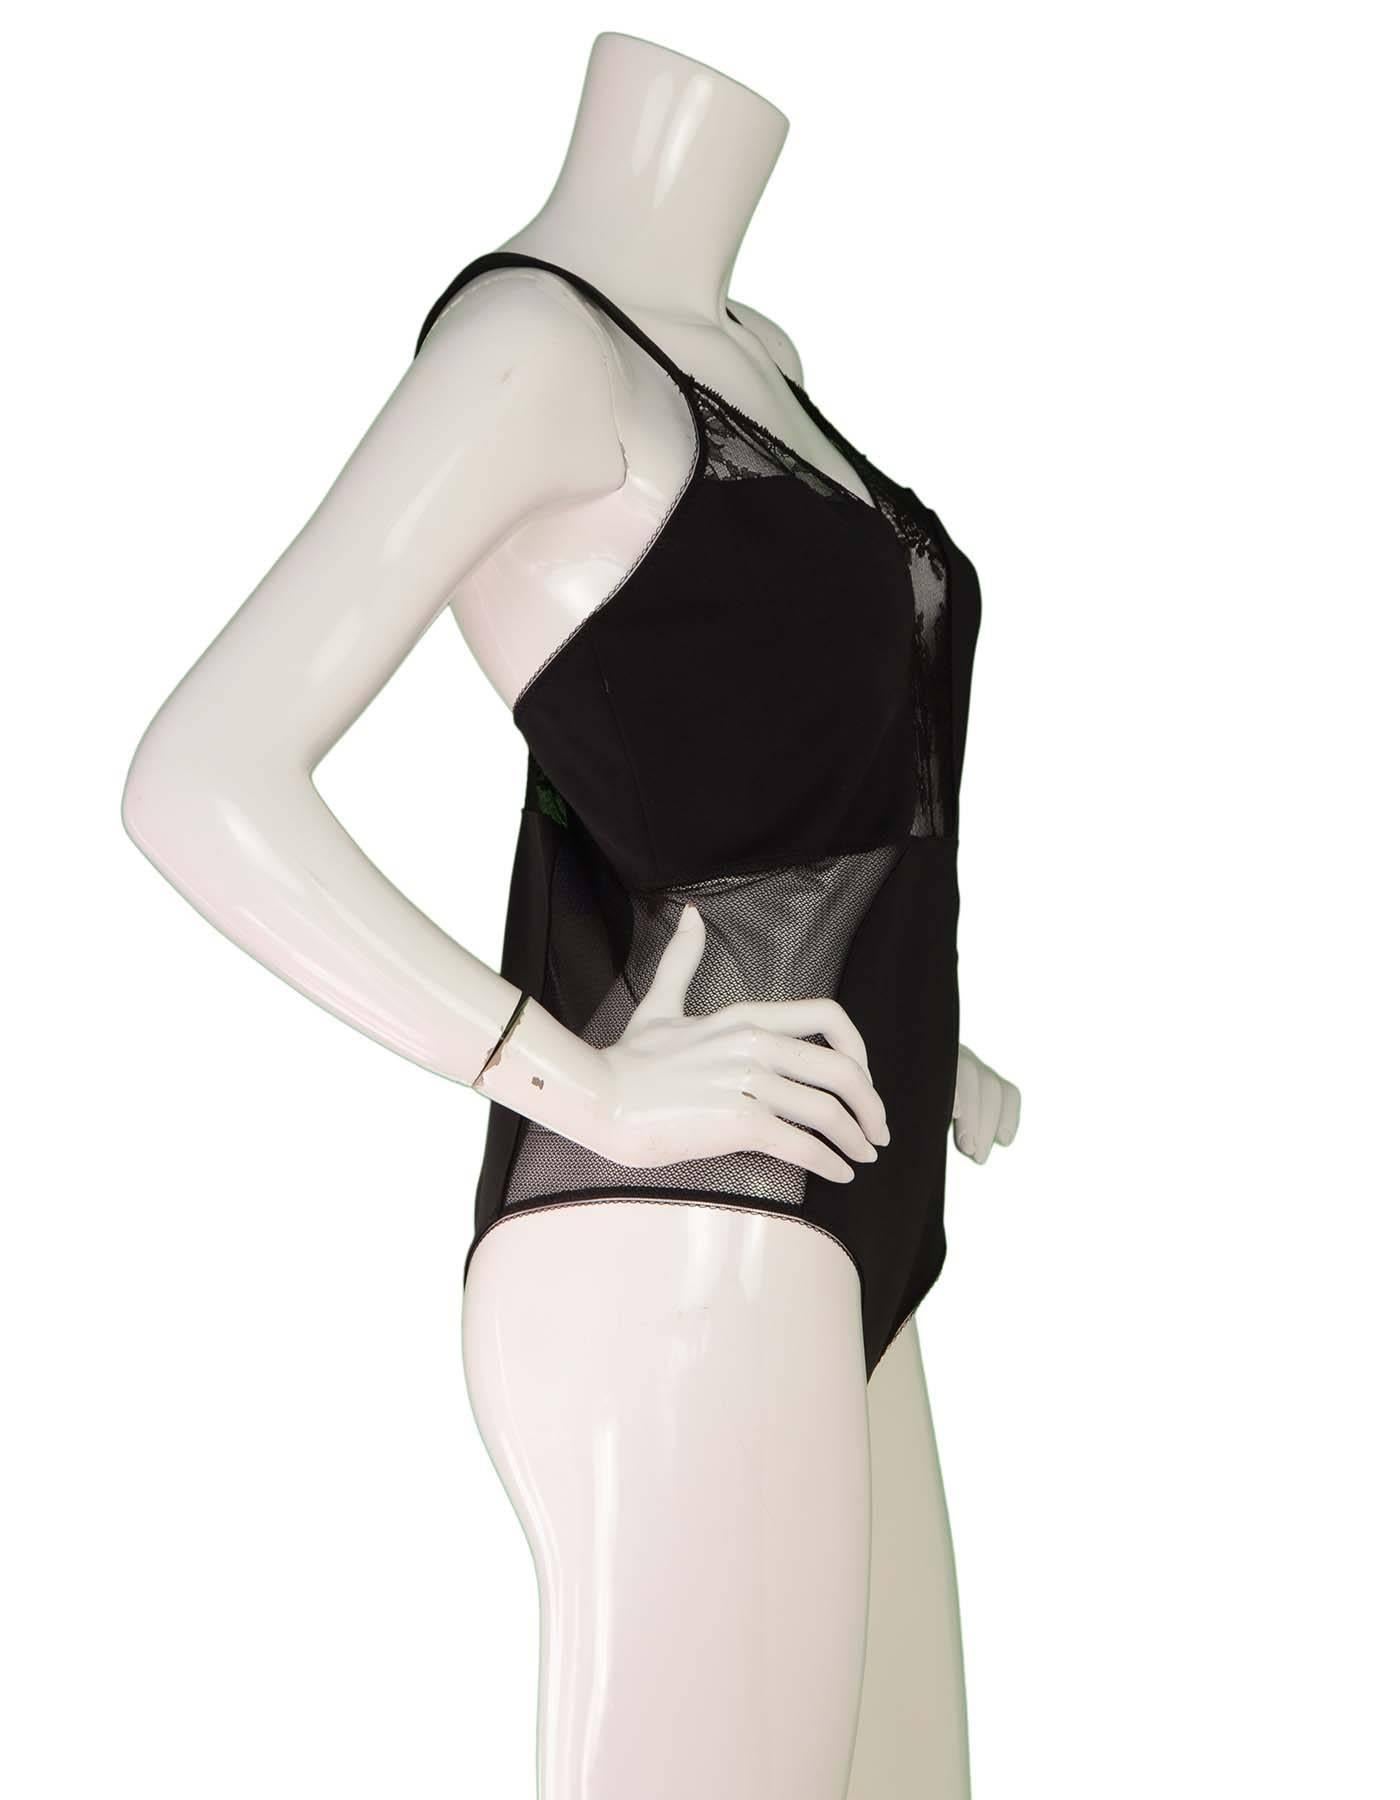 Stella McCartney NEW Lace & Spandex Bodysuit 
Features adjustable shoulder straps and lace and mesh panels
Made In: China
Color: Black
Composition: 93% polyamide, 7% elastane, Lace- 81% polyamide, 19% elastane, Mesh- 84% polyamide, 16%